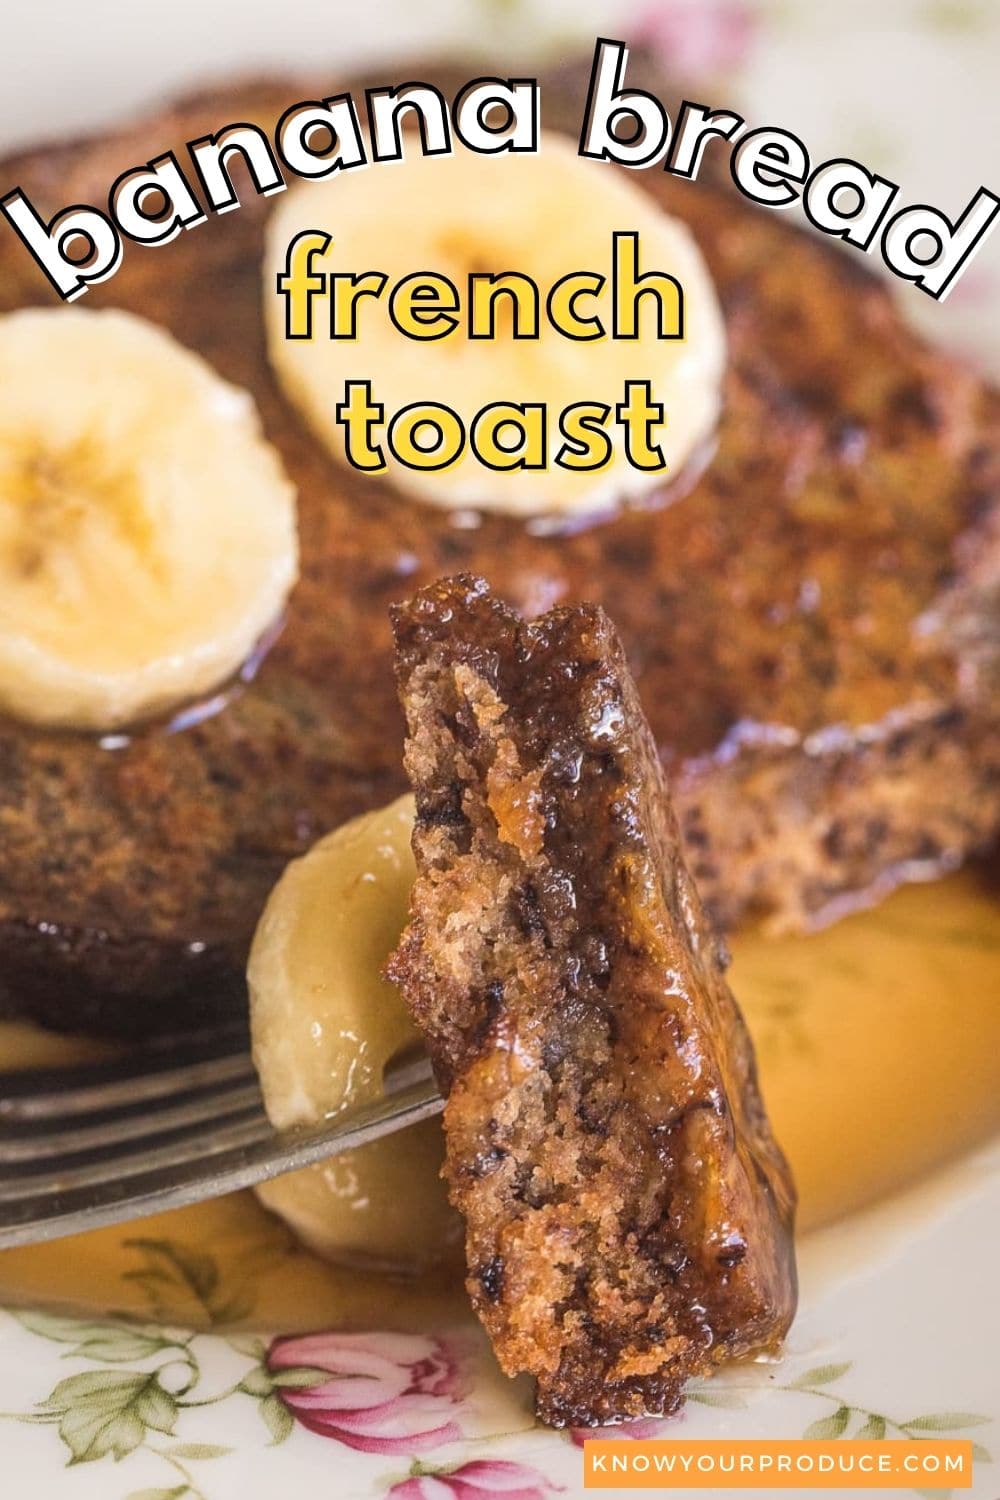 banana bread french toast with text saying banana bread french toast.